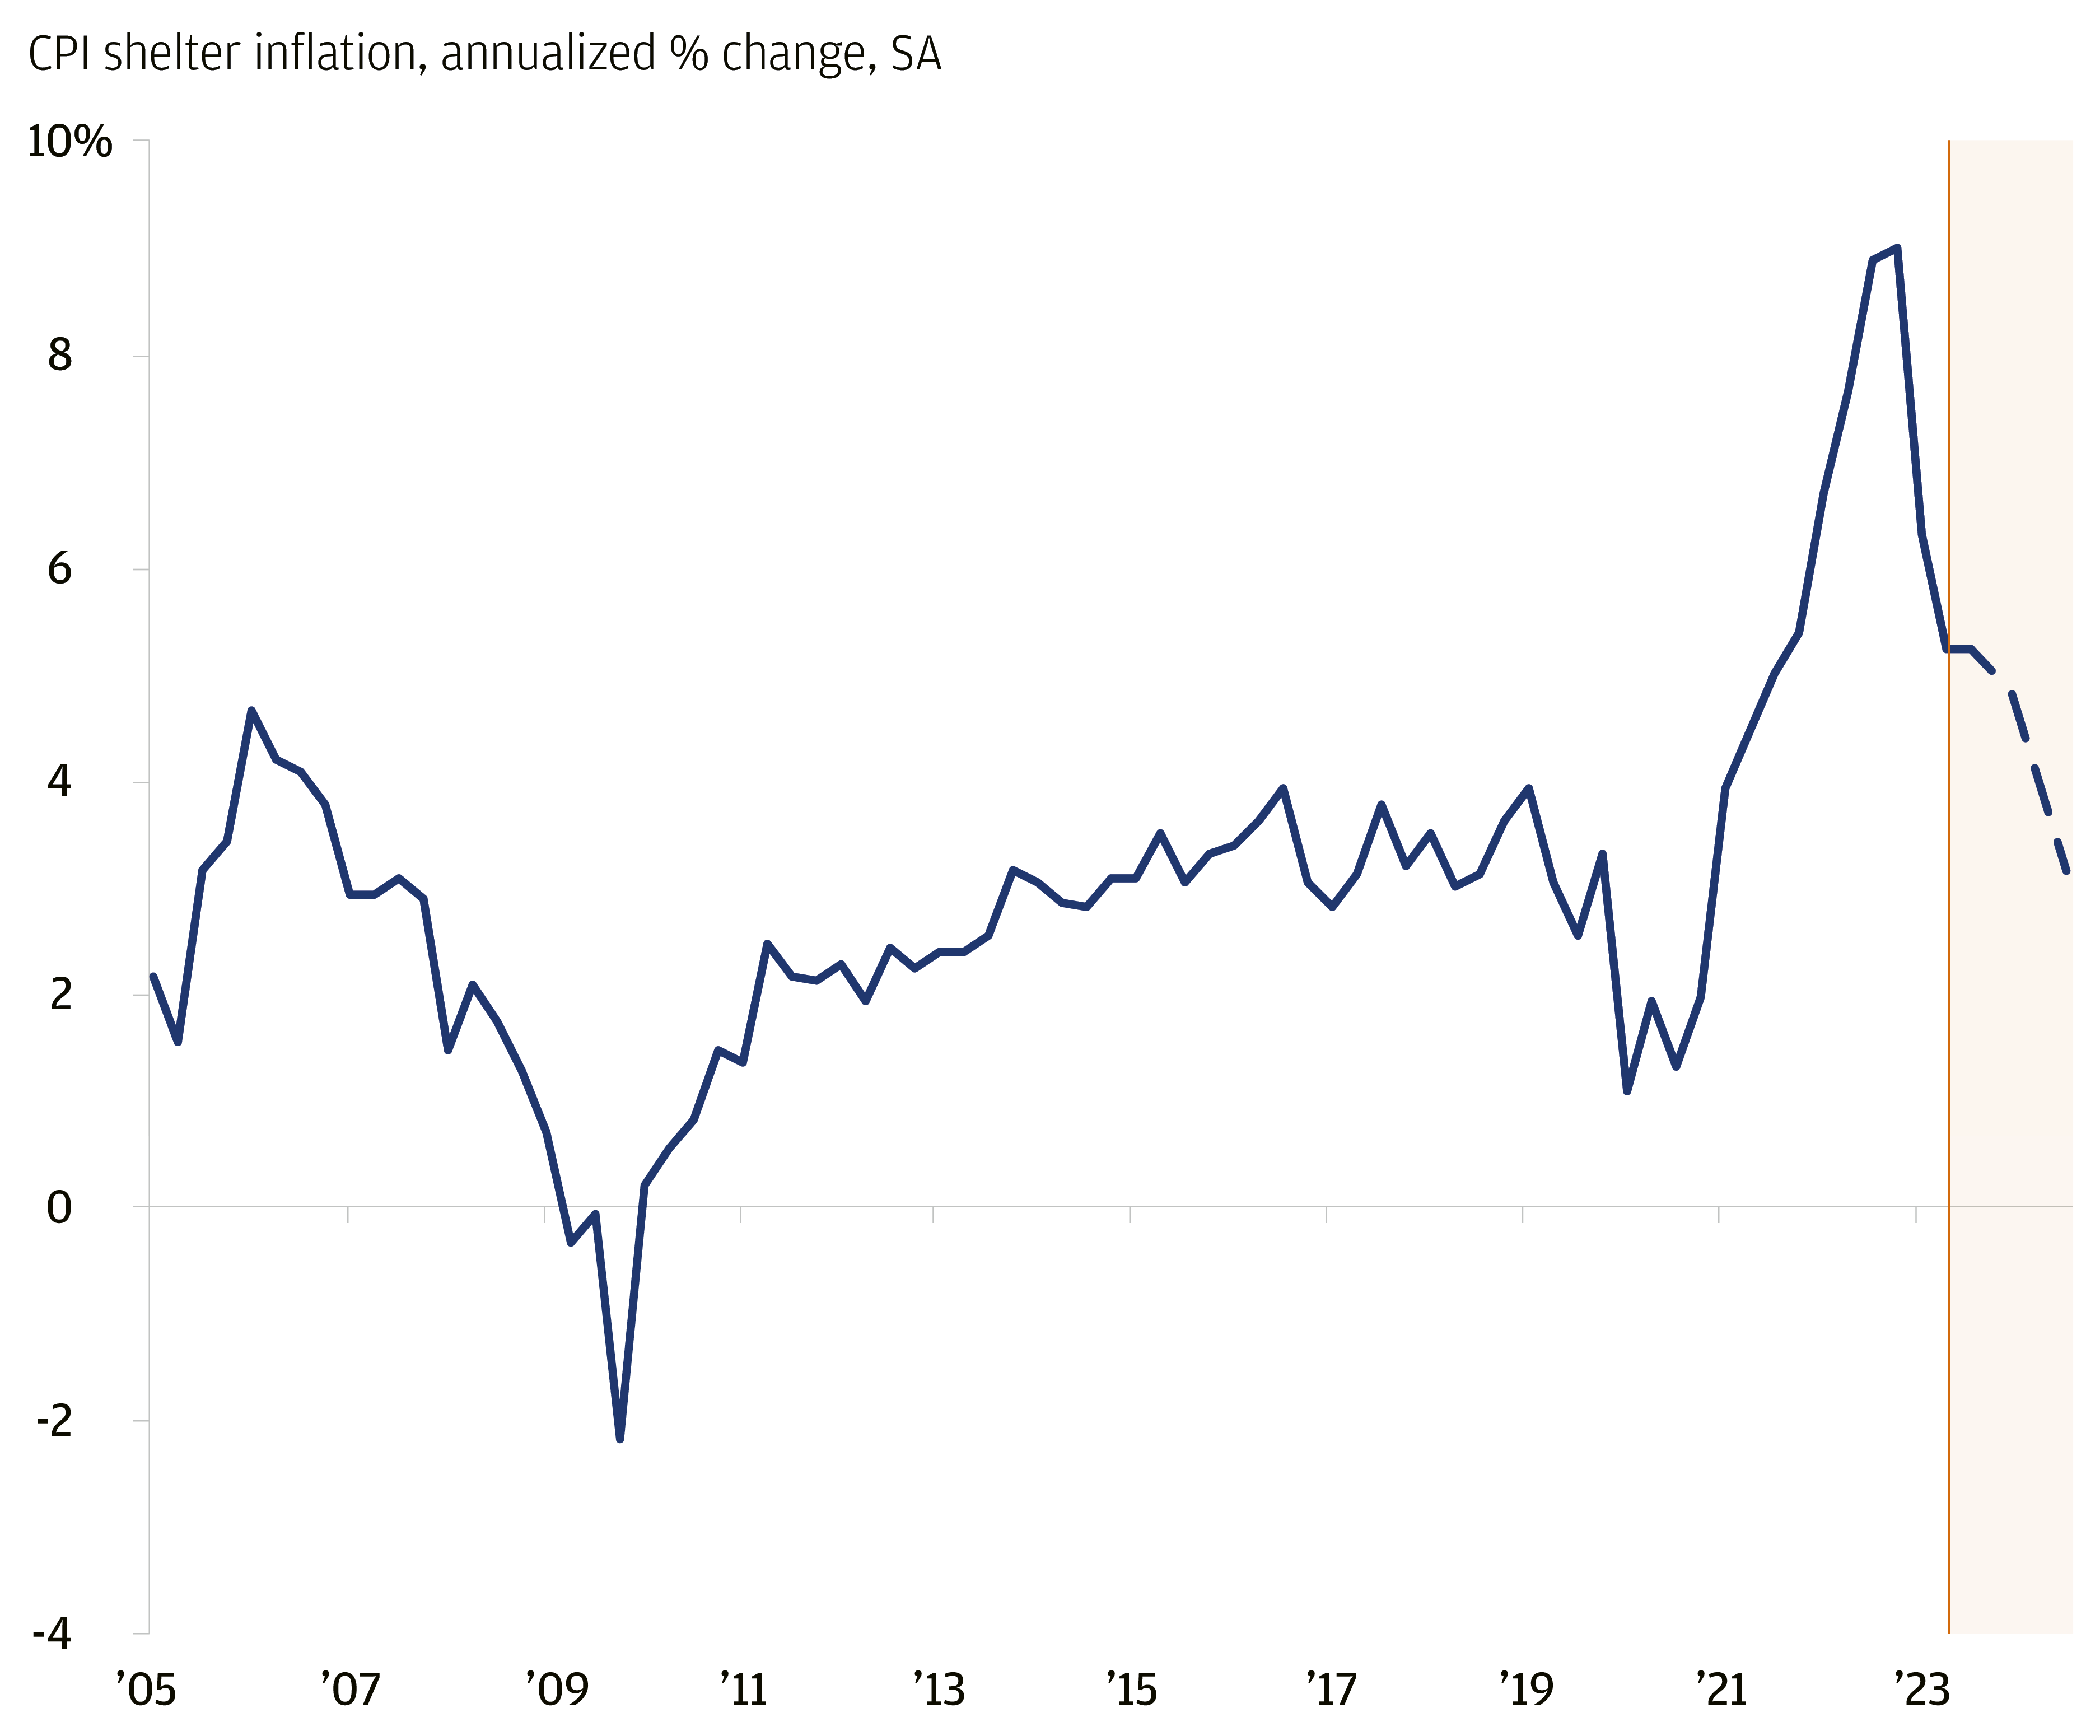 The chart describes the annualized % change of shelter inflation.